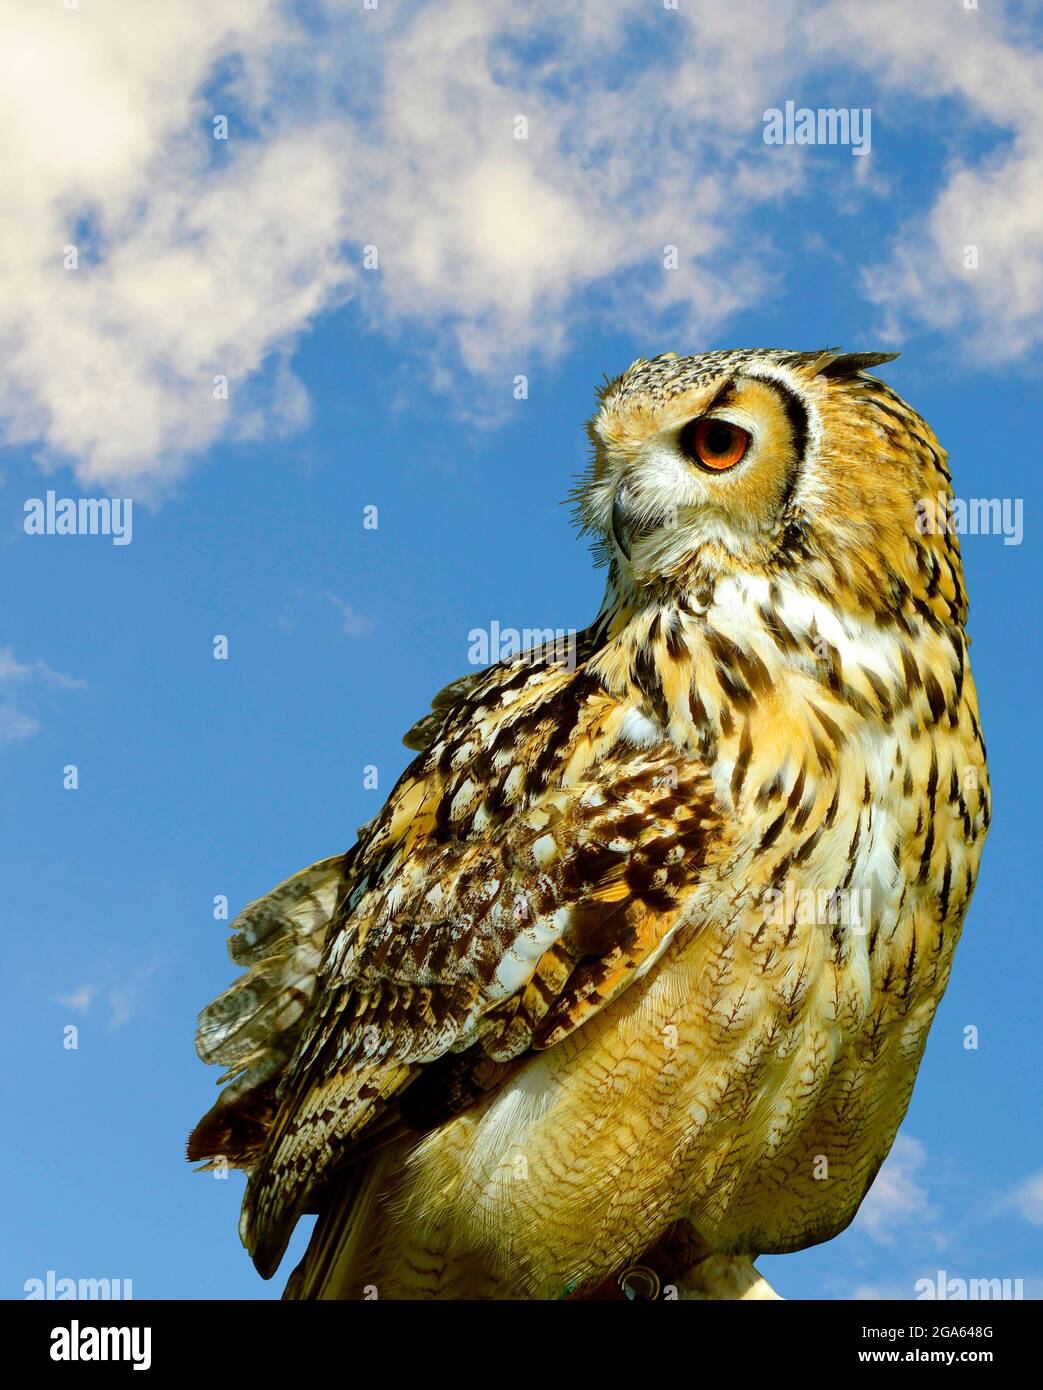 Eurasian eagle owl Latin name Bubo bubo perched with a blue sky background Stock Photo